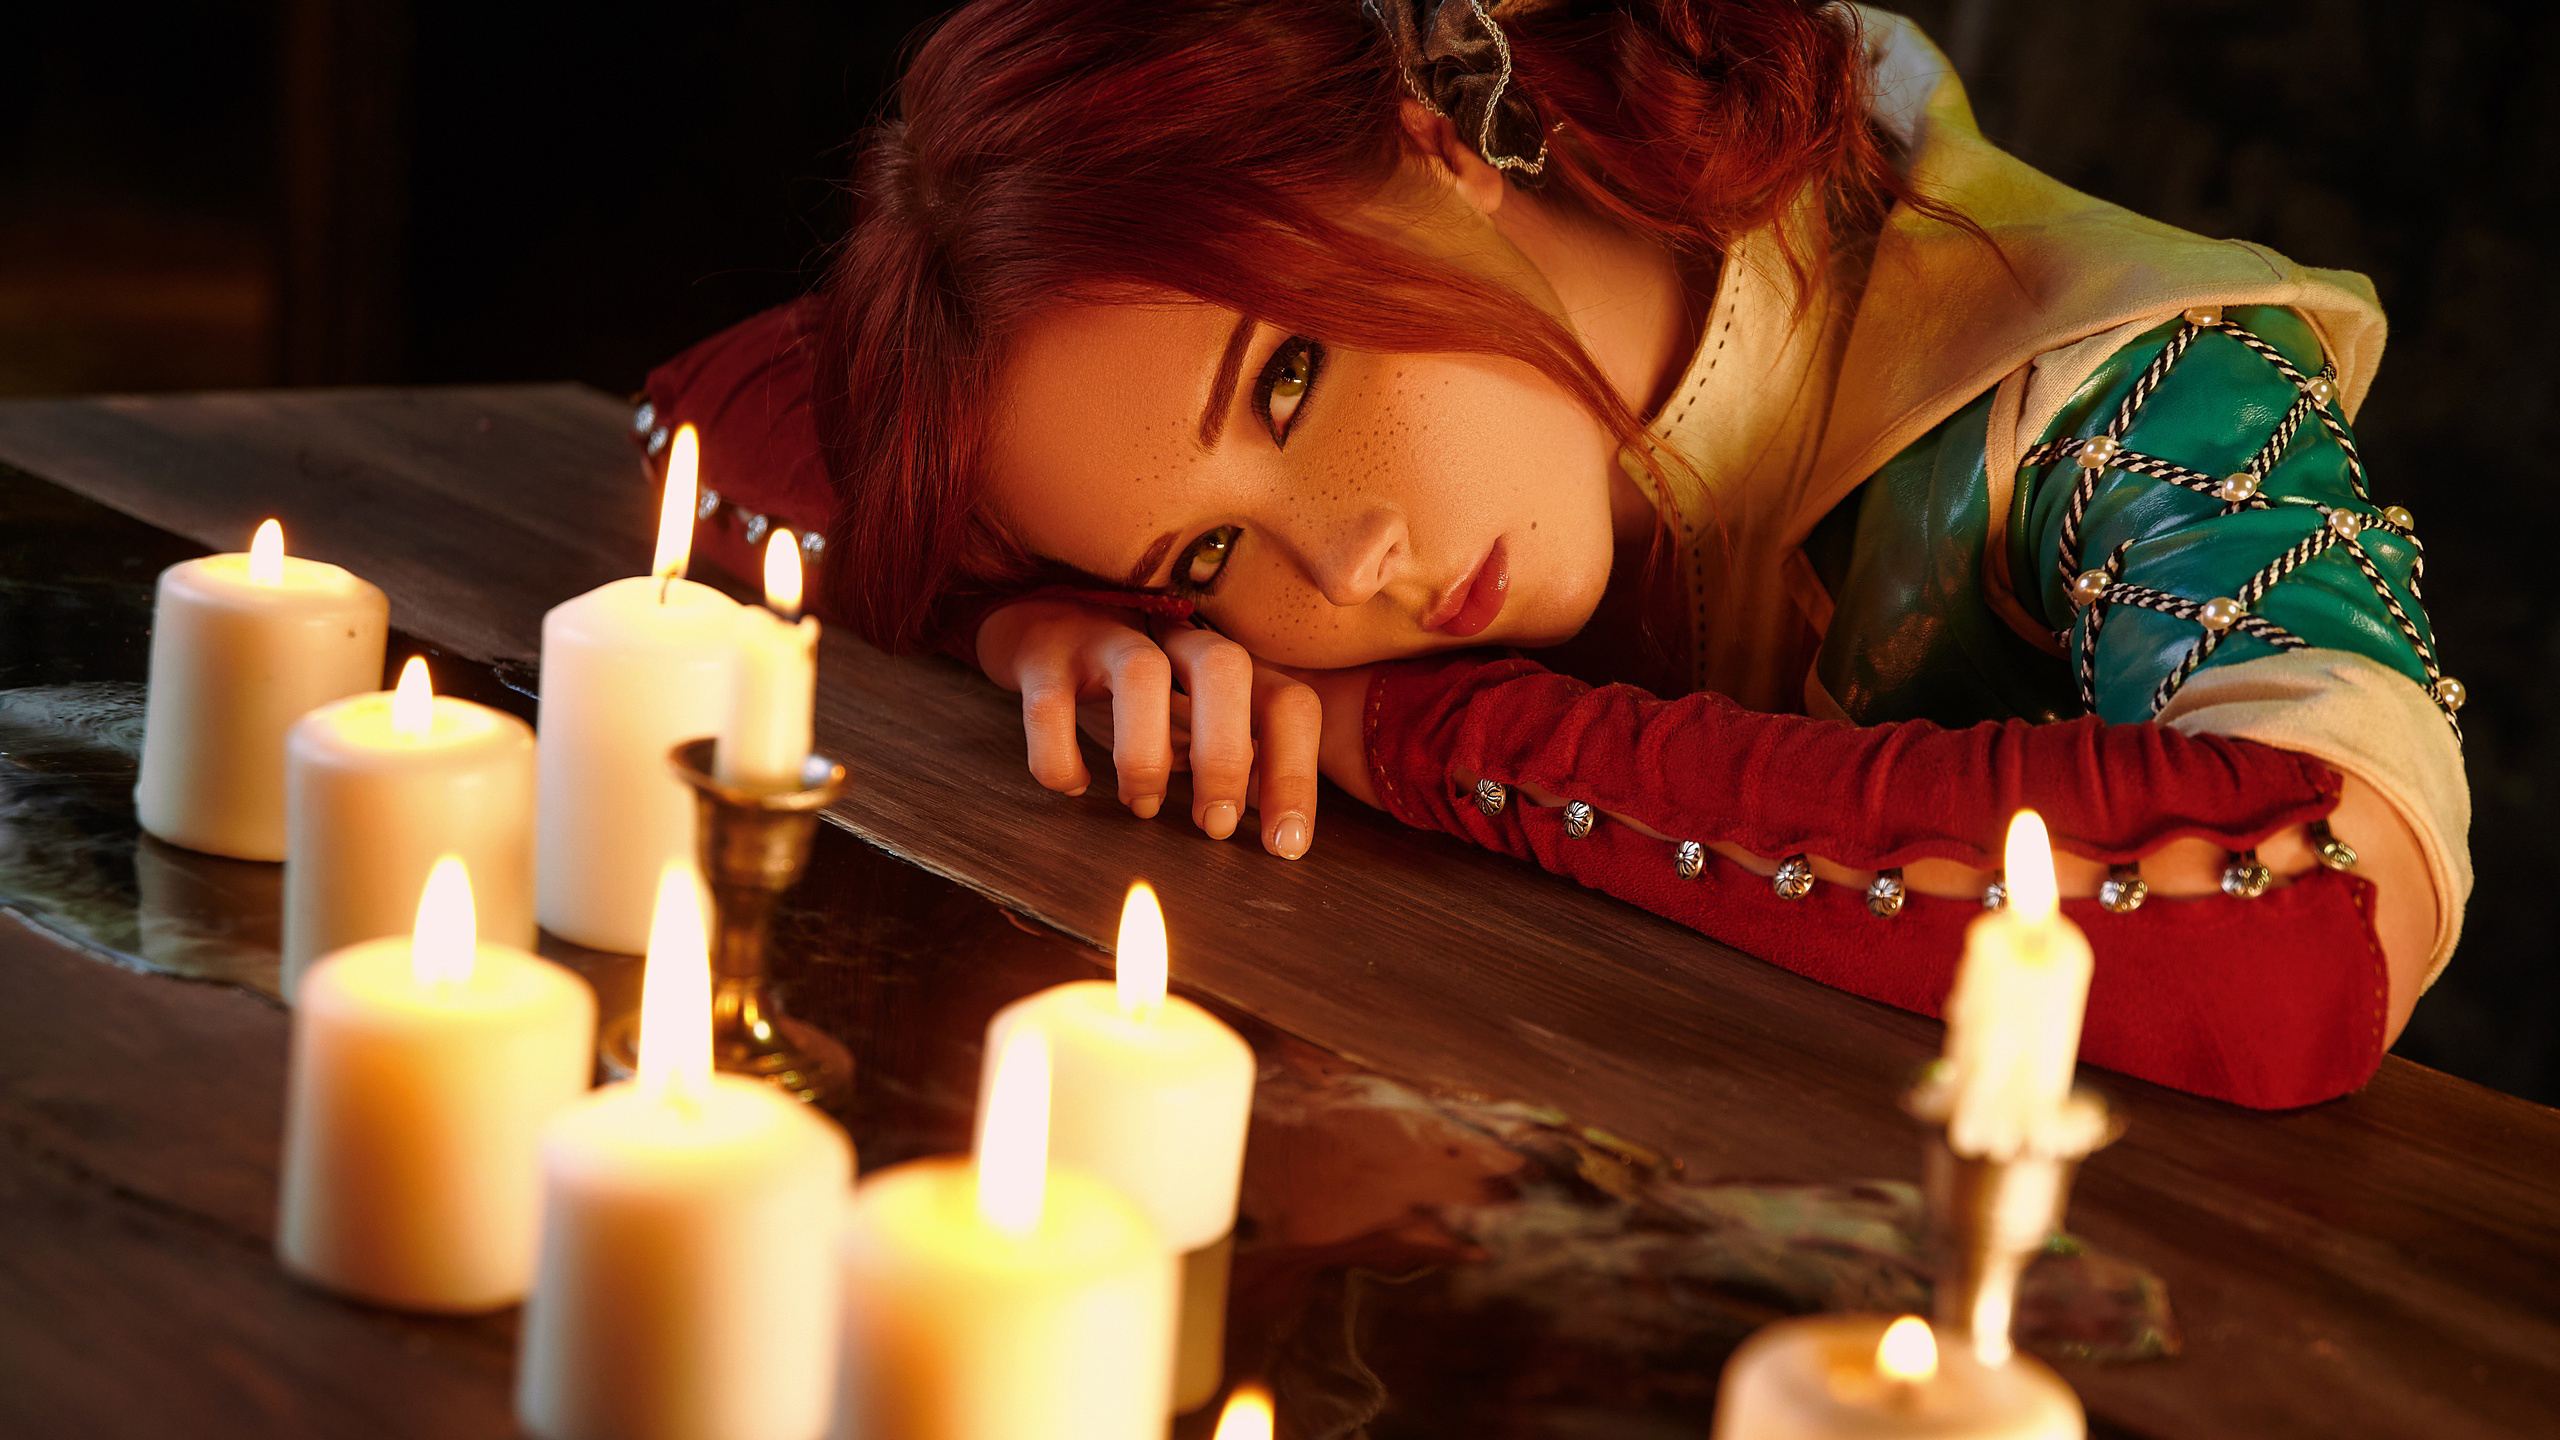 People 2560x1440 Sweetie_Fox cosplay Triss Merigold candles redhead The Witcher The Witcher 3: Wild Hunt women model